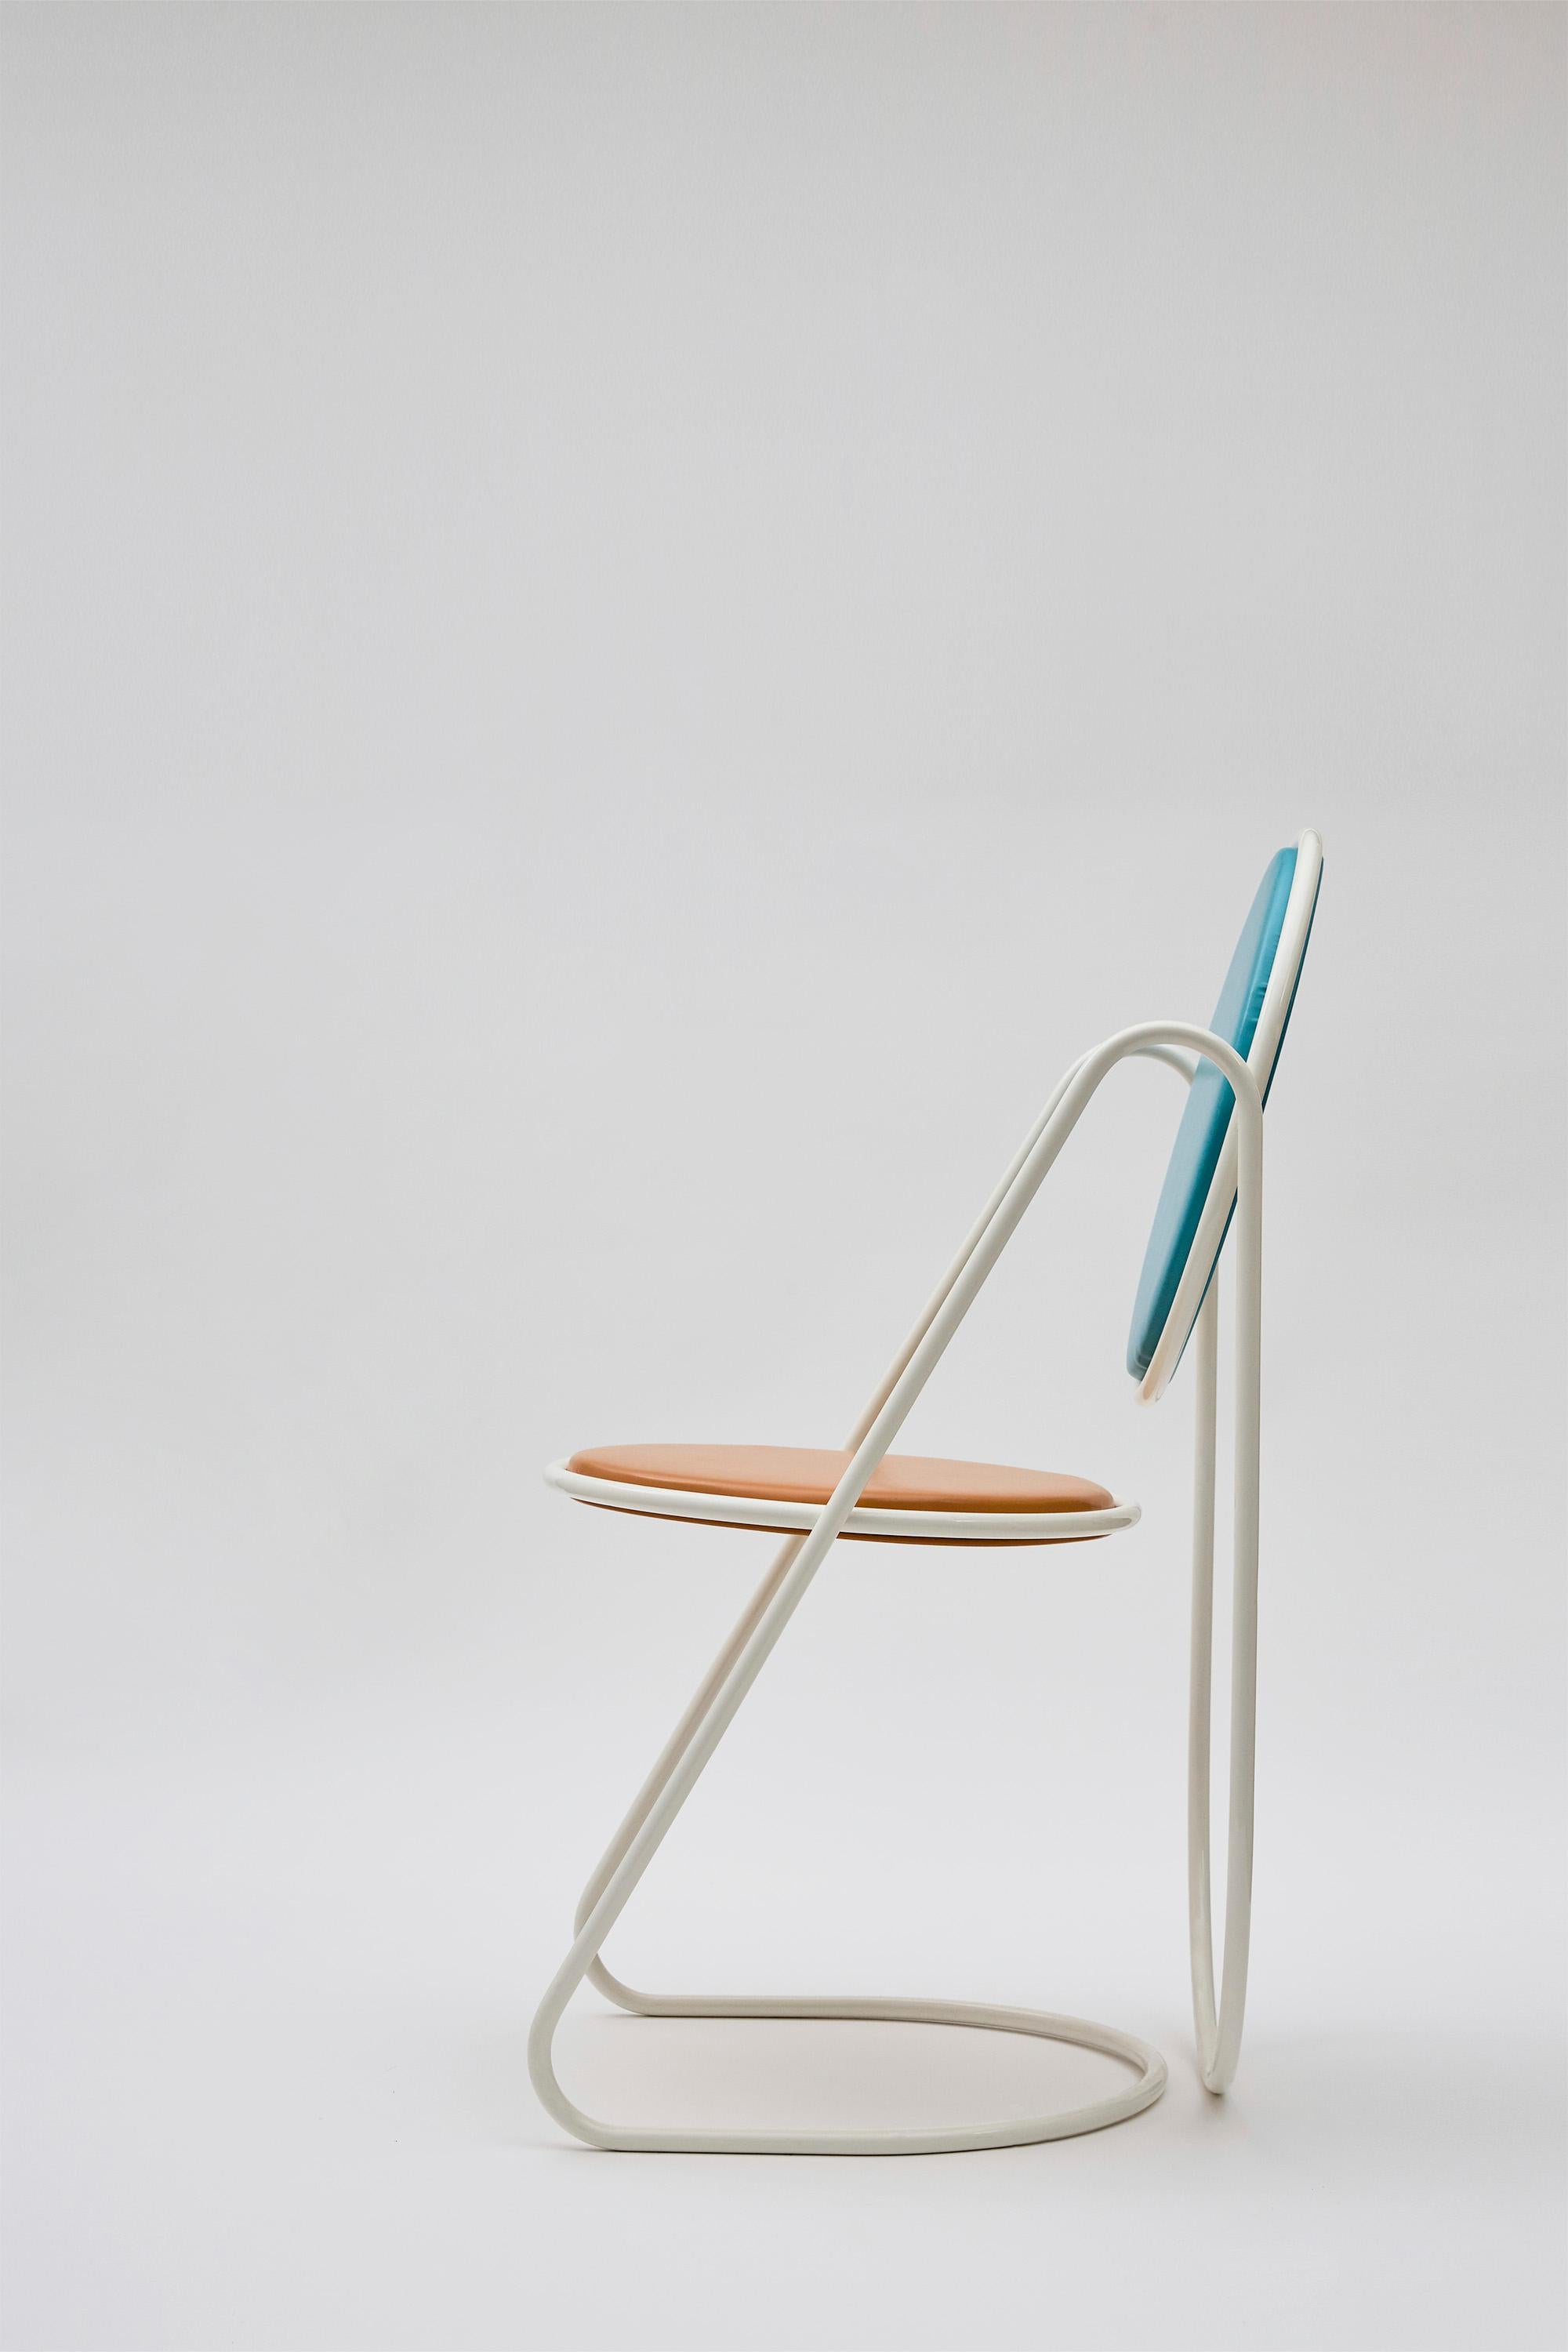 Other U-Disk Chair, White, Light-Blue & Orange For Sale